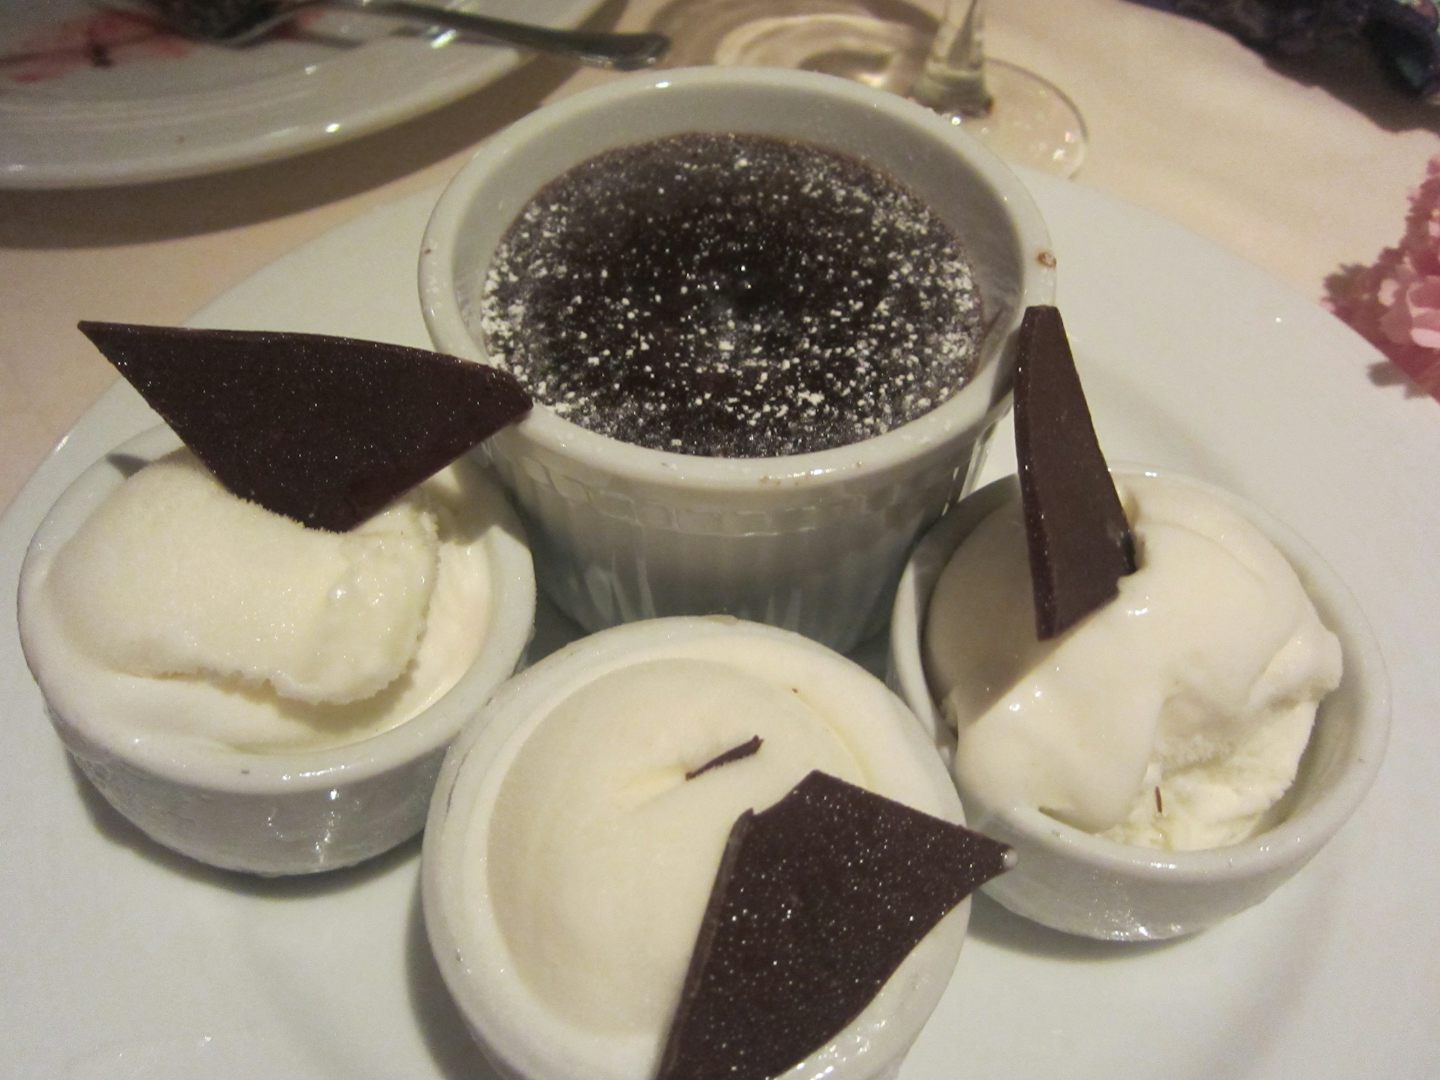 Famous dessert - Chocolate Lava cake and ice cream
Yes, it is as good as they say ;)